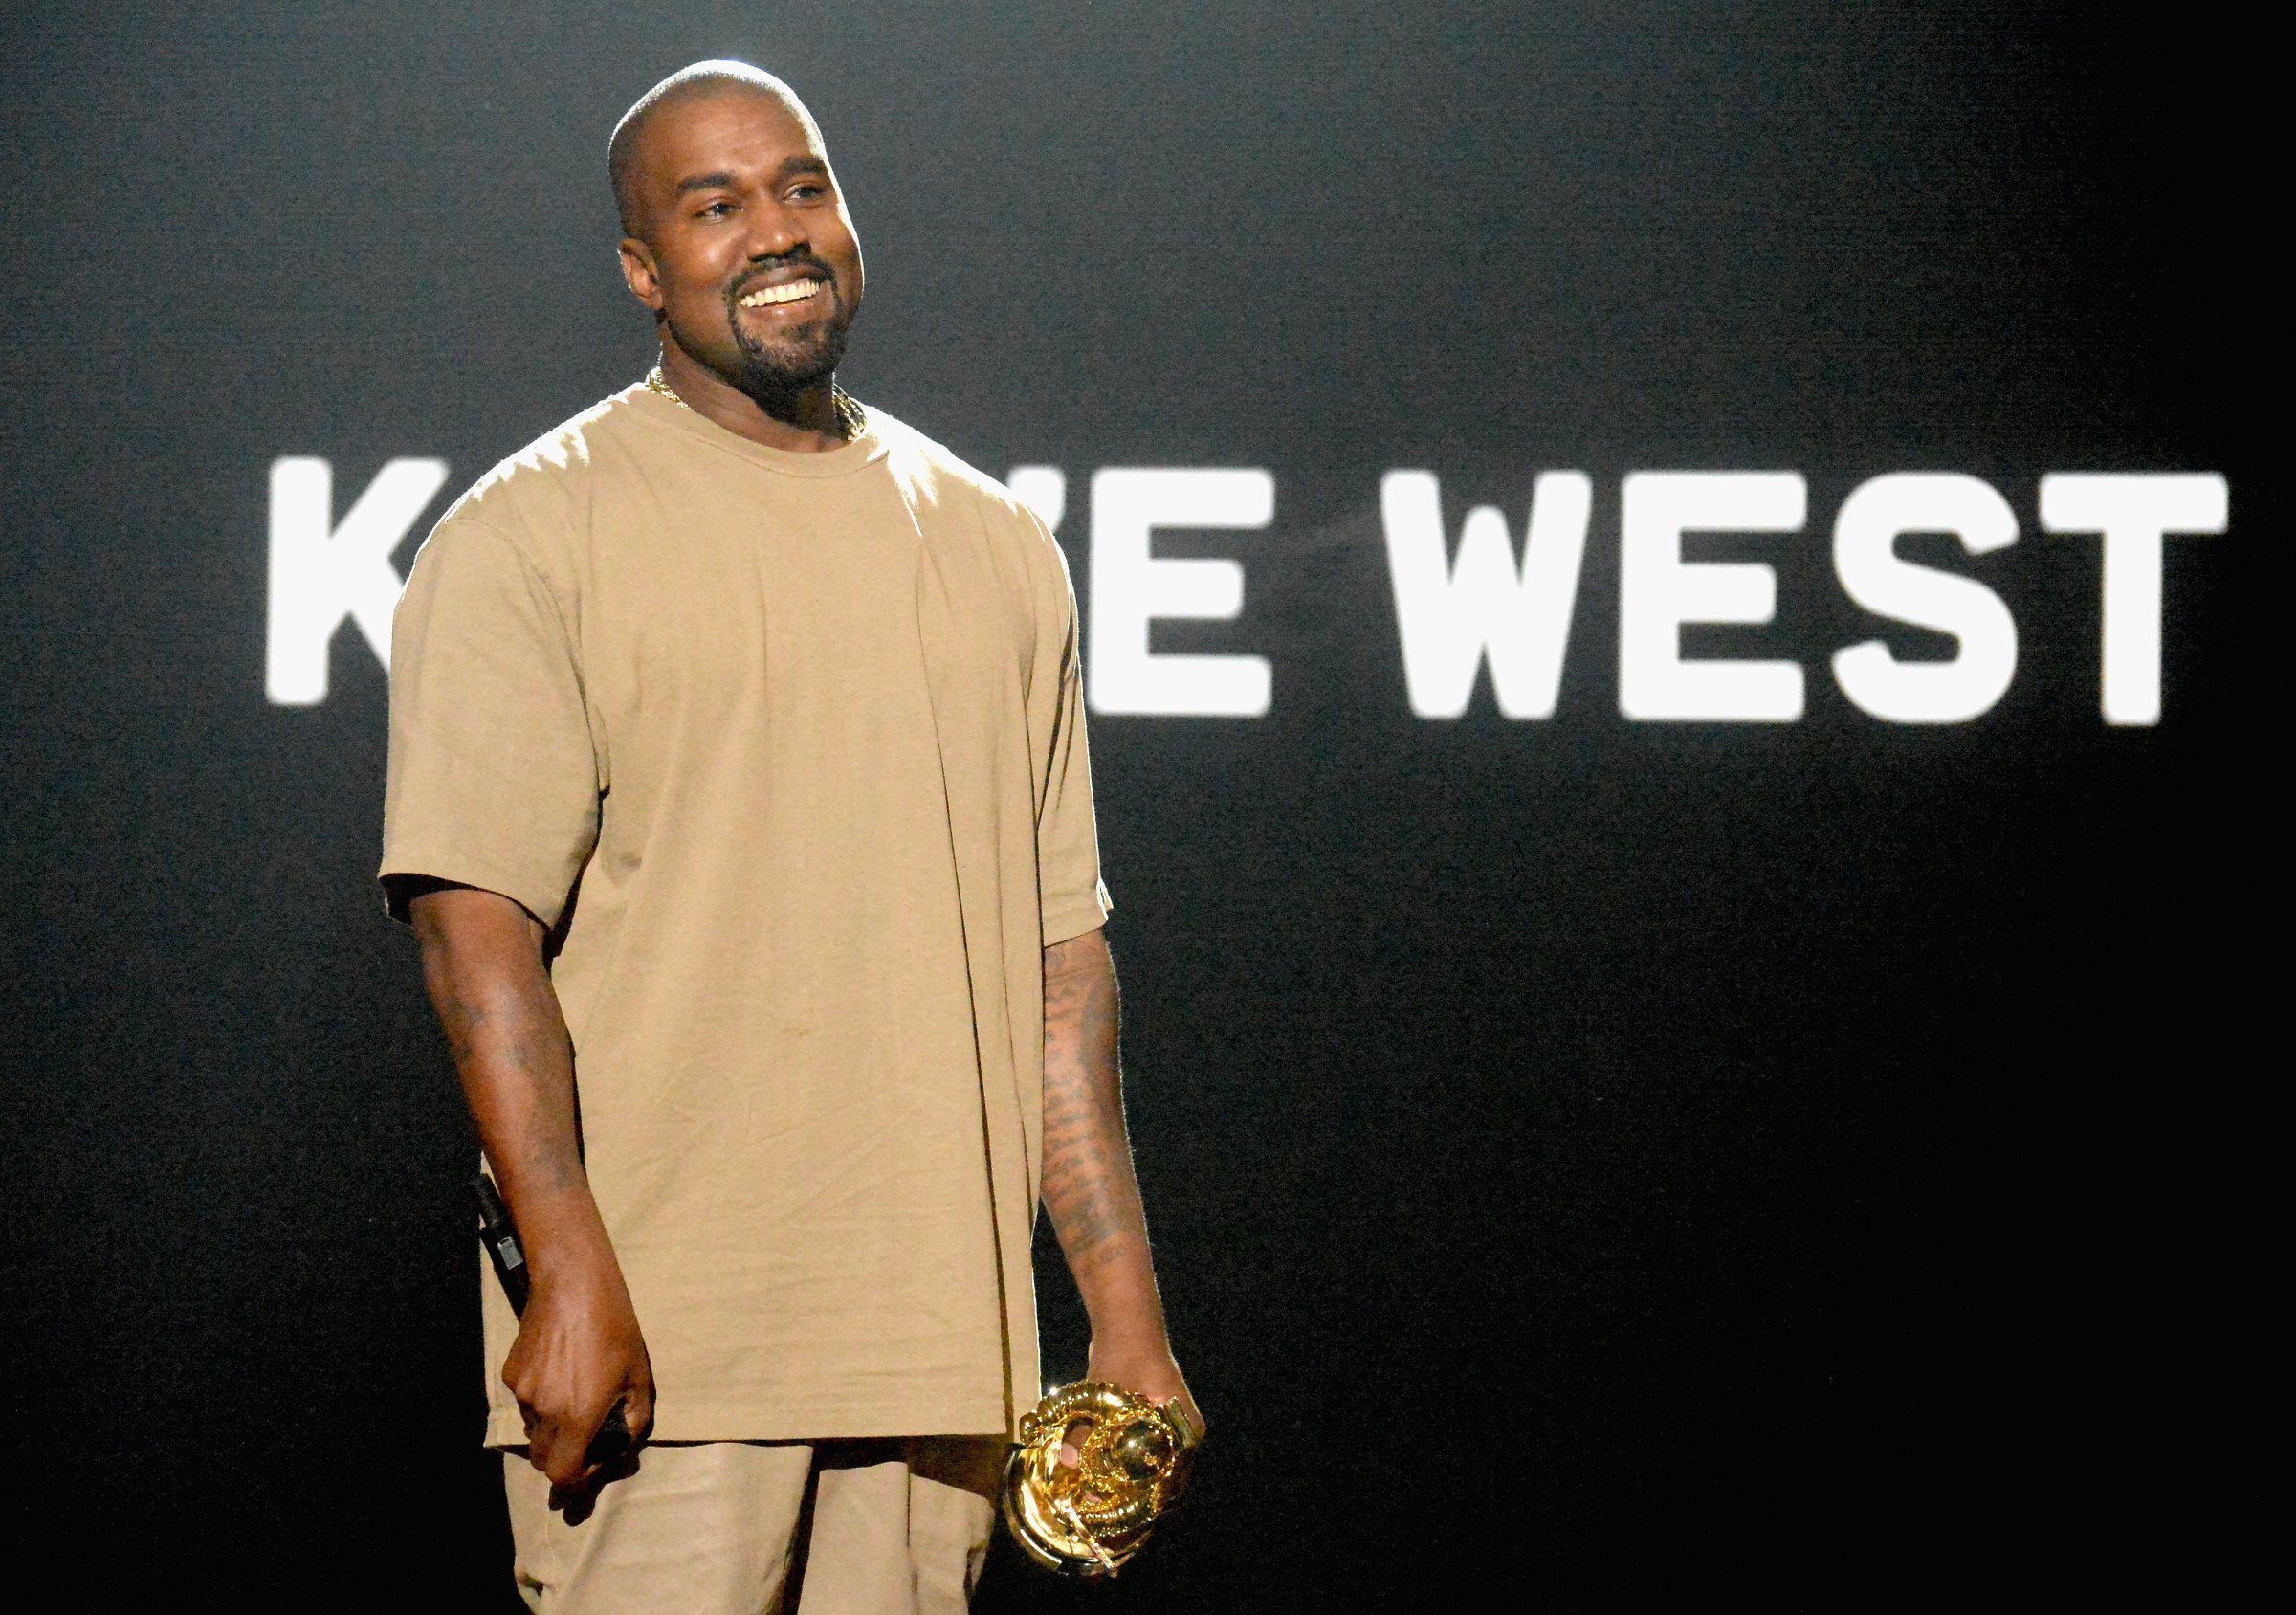 Kanye West accepts the Michael Jackson Video Vanguard Award onstage during the 2015 MTV Video Music Awards at Microsoft Theater on August 30, 2015 in Los Angeles, California.